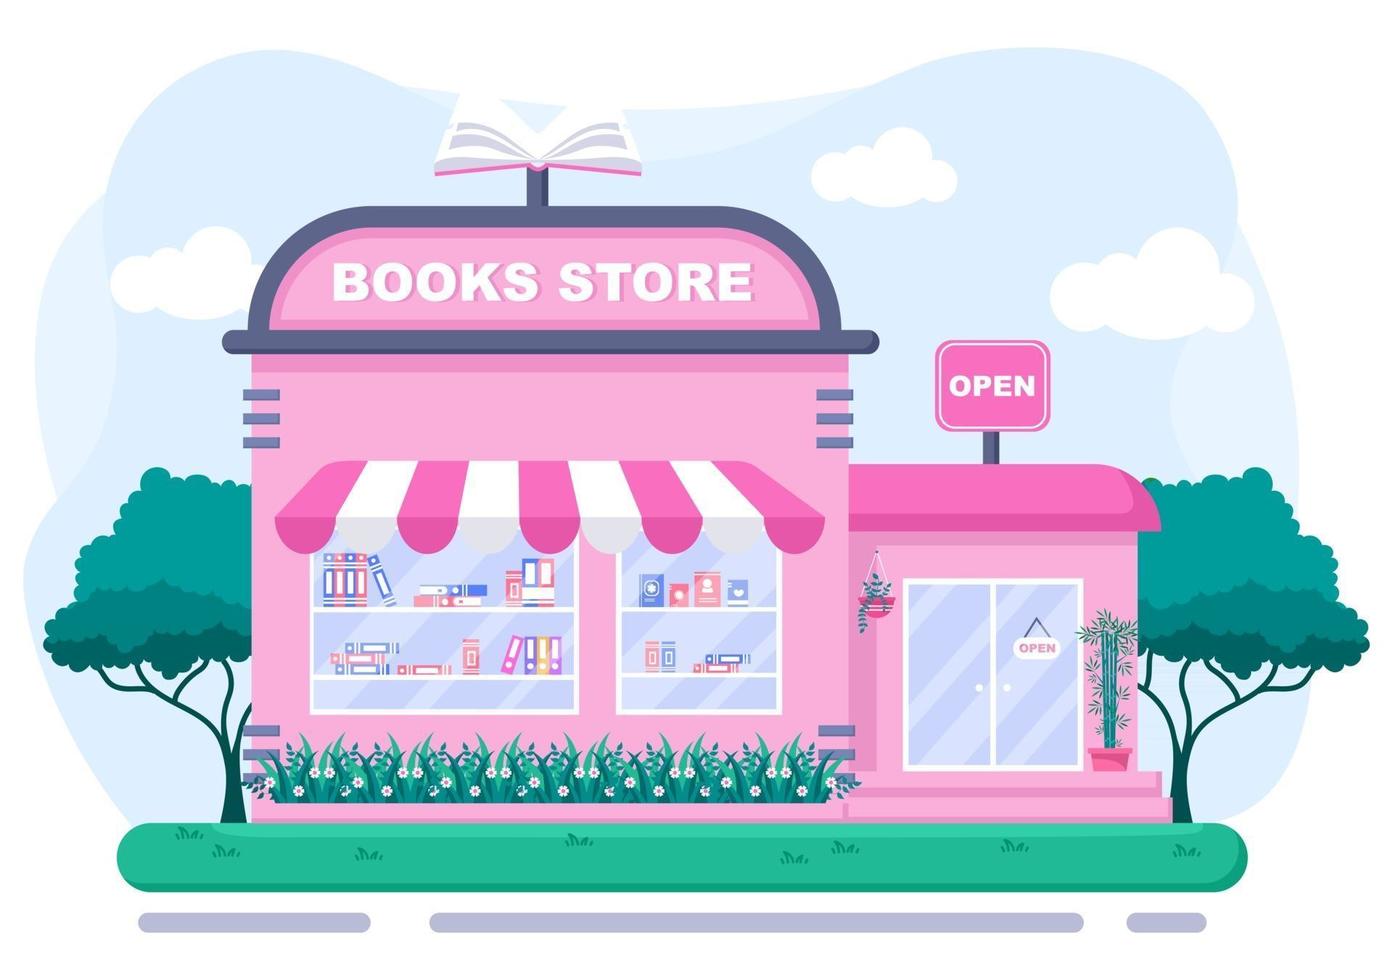 Bookstore Vector Illustration is A Place To Buy Books or Place Read